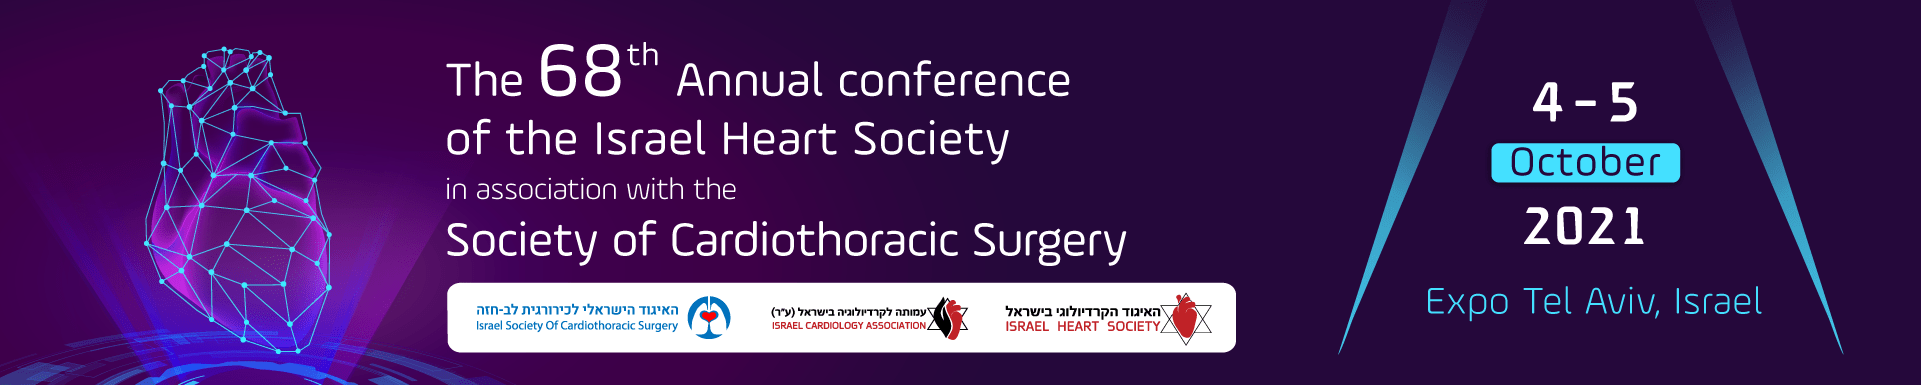 The 68th annual conference of the ISR heart society - Belong